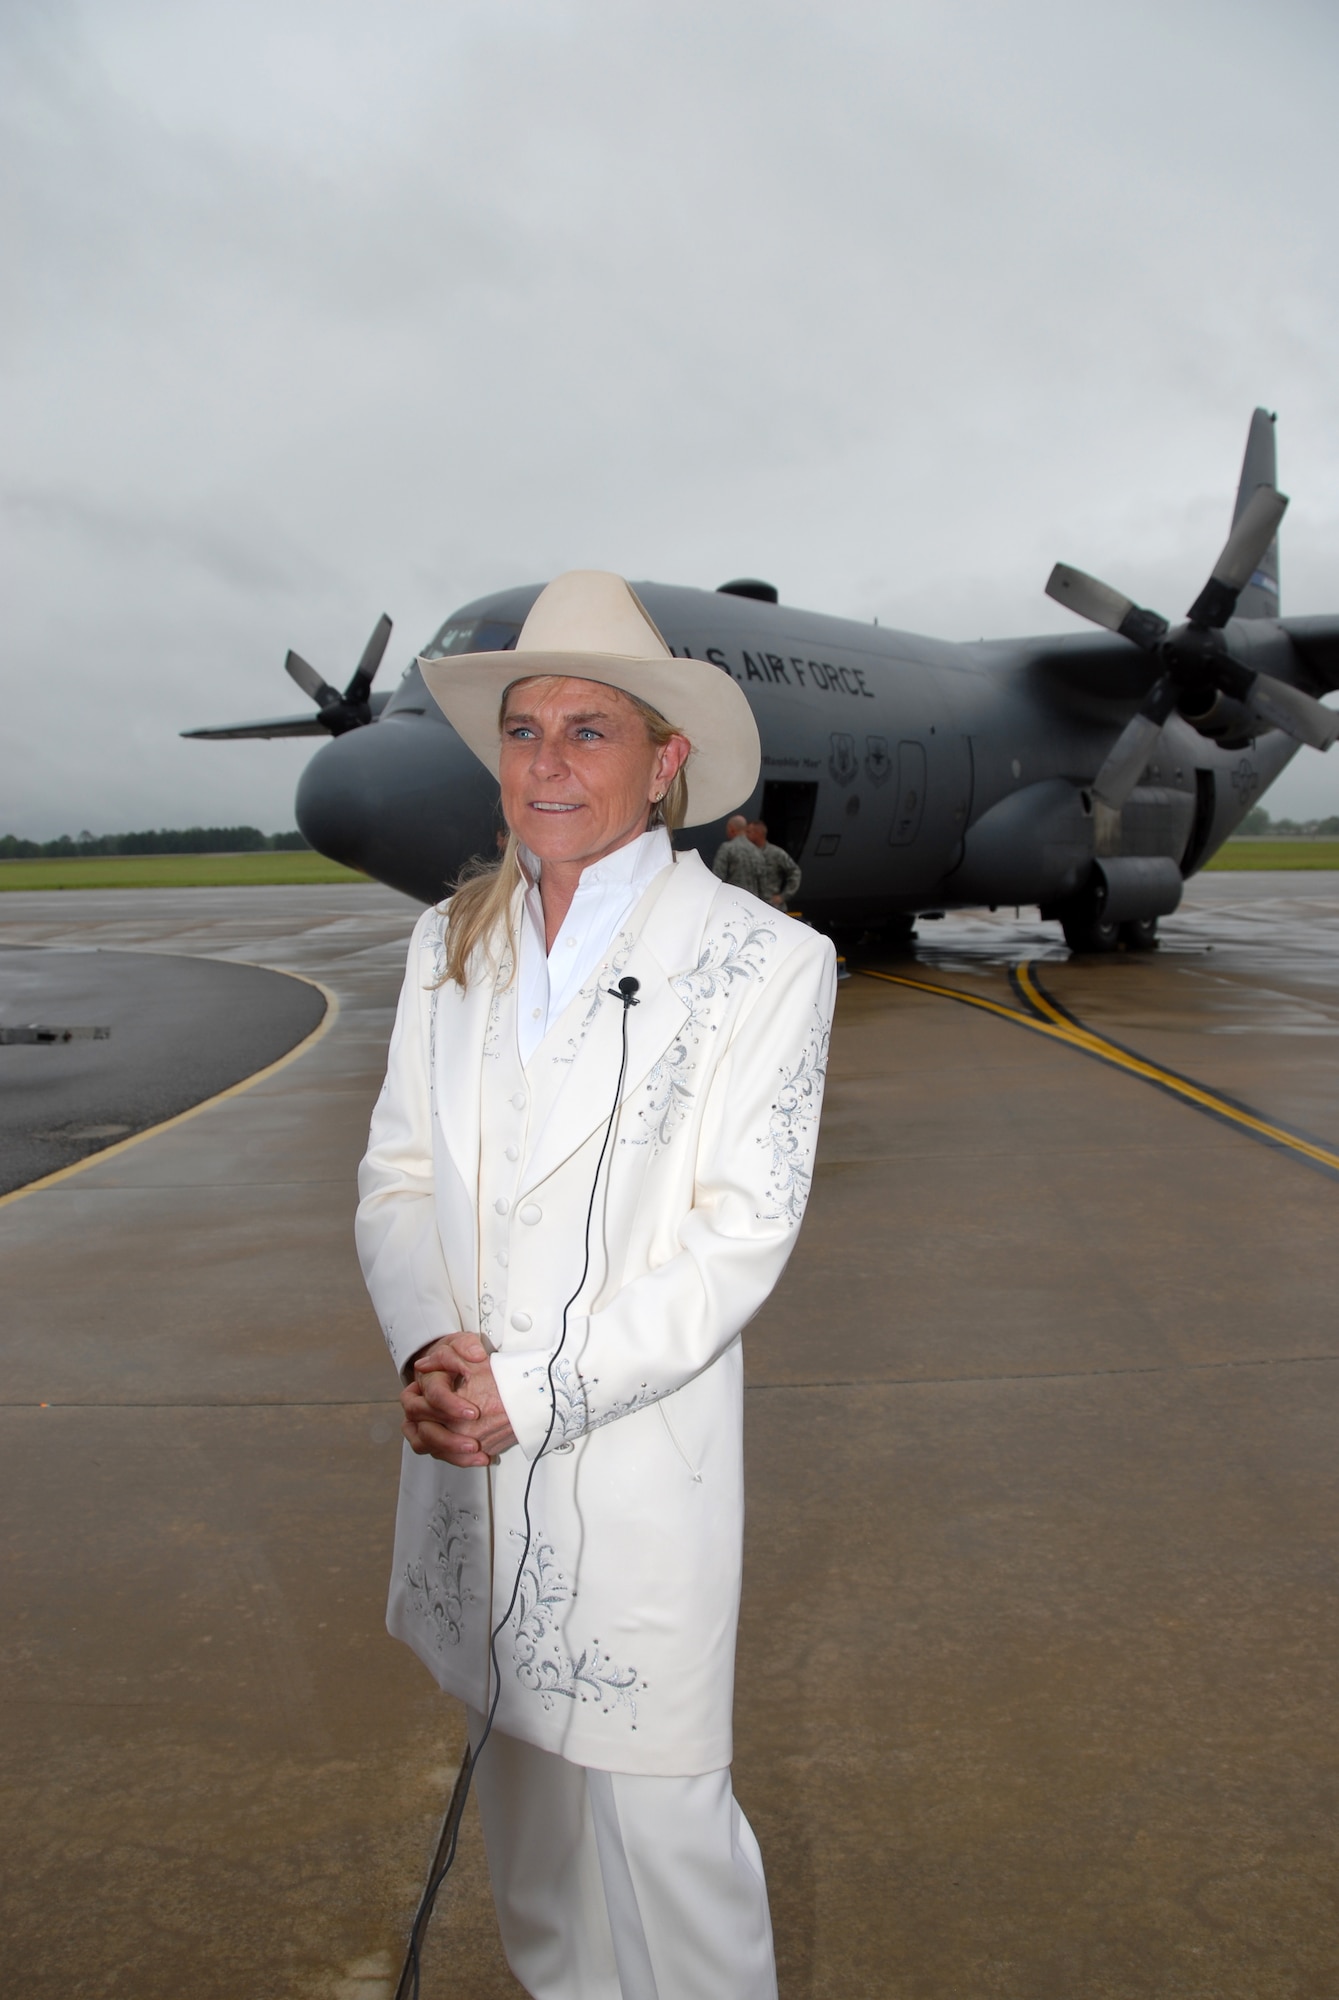 Jett Williams, daughter of country music legend Hank Williams, grants media interviews on the Maxwell AFB, Ala., flightline at the 908th Airlift Wing's celebration of the 60th anniversary of the Air Force Reserve at Maxwell AFB, Ala., April 5, 2008. Along with celebrating the Air Force Reserve's diamond anniversary, the Montgomery, Ala.-based 908th AW honored Hank Williams by changing the unit's C-130 cargo planes' radio call sign to "Hank" and painting "Ramblin' Man" over the door of one of the aircraft.  (U.S. Air Force photo by Mr. Jeff Melvin)